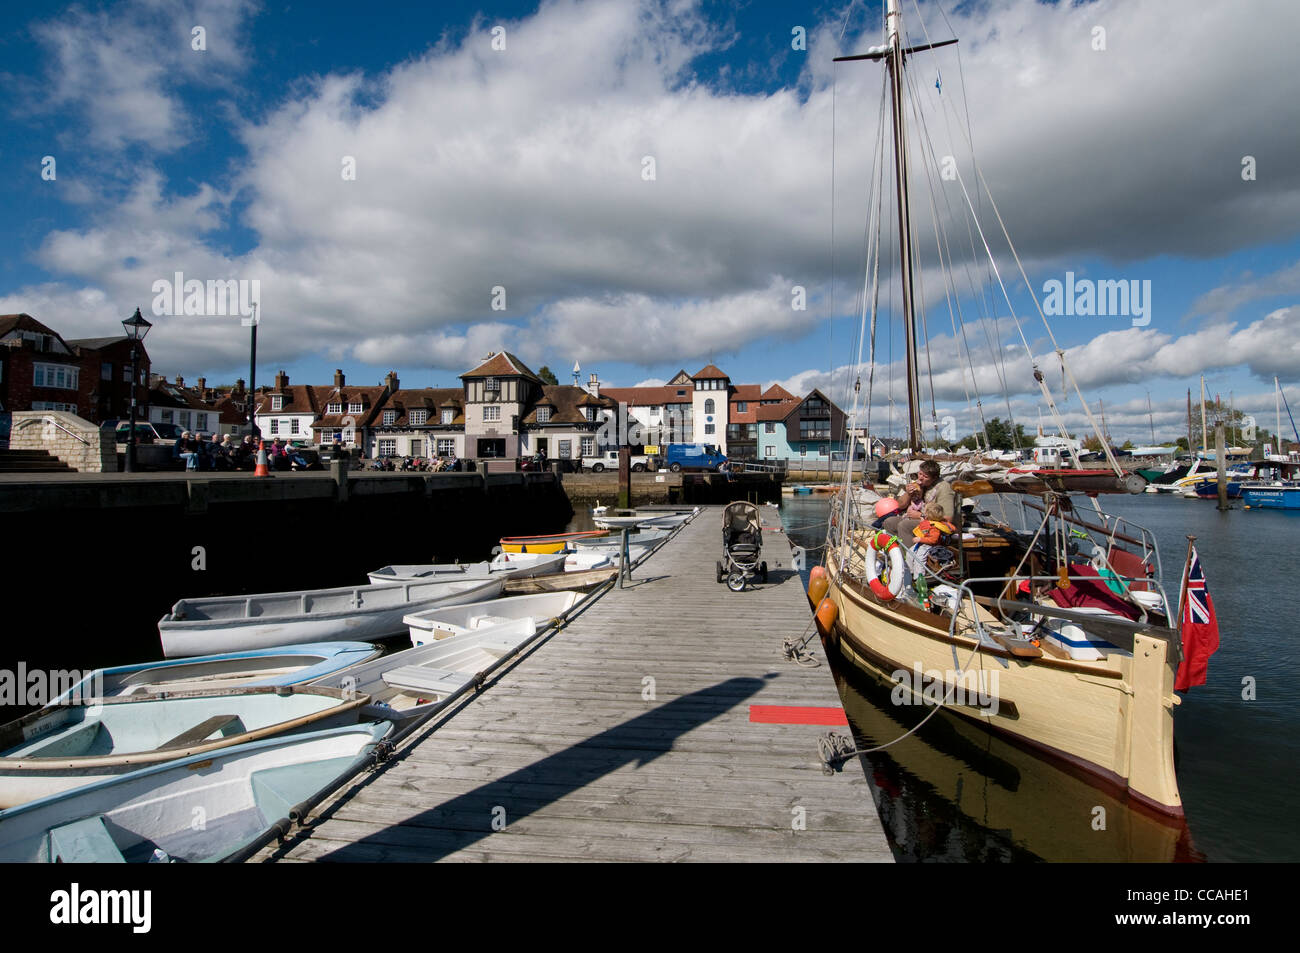 A moored boat on the Quay in Lymington on the boundary of the New Forest National Park, Britain. Stock Photo